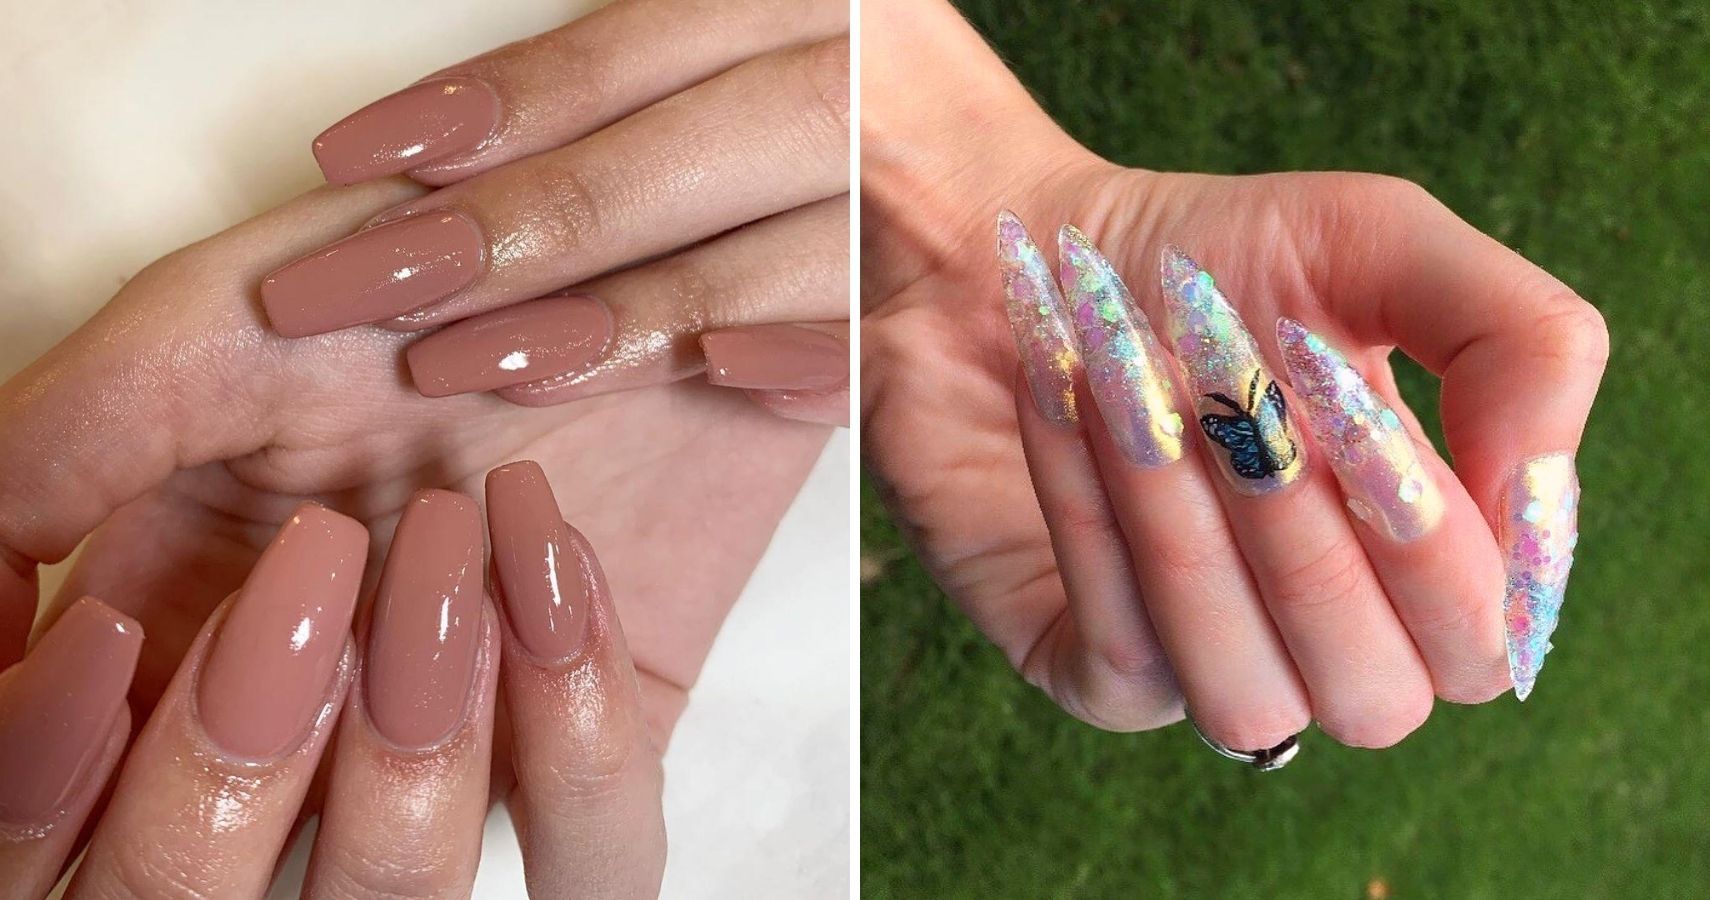 5. "Must-Have Nail Colors for Summer 2020" - wide 10